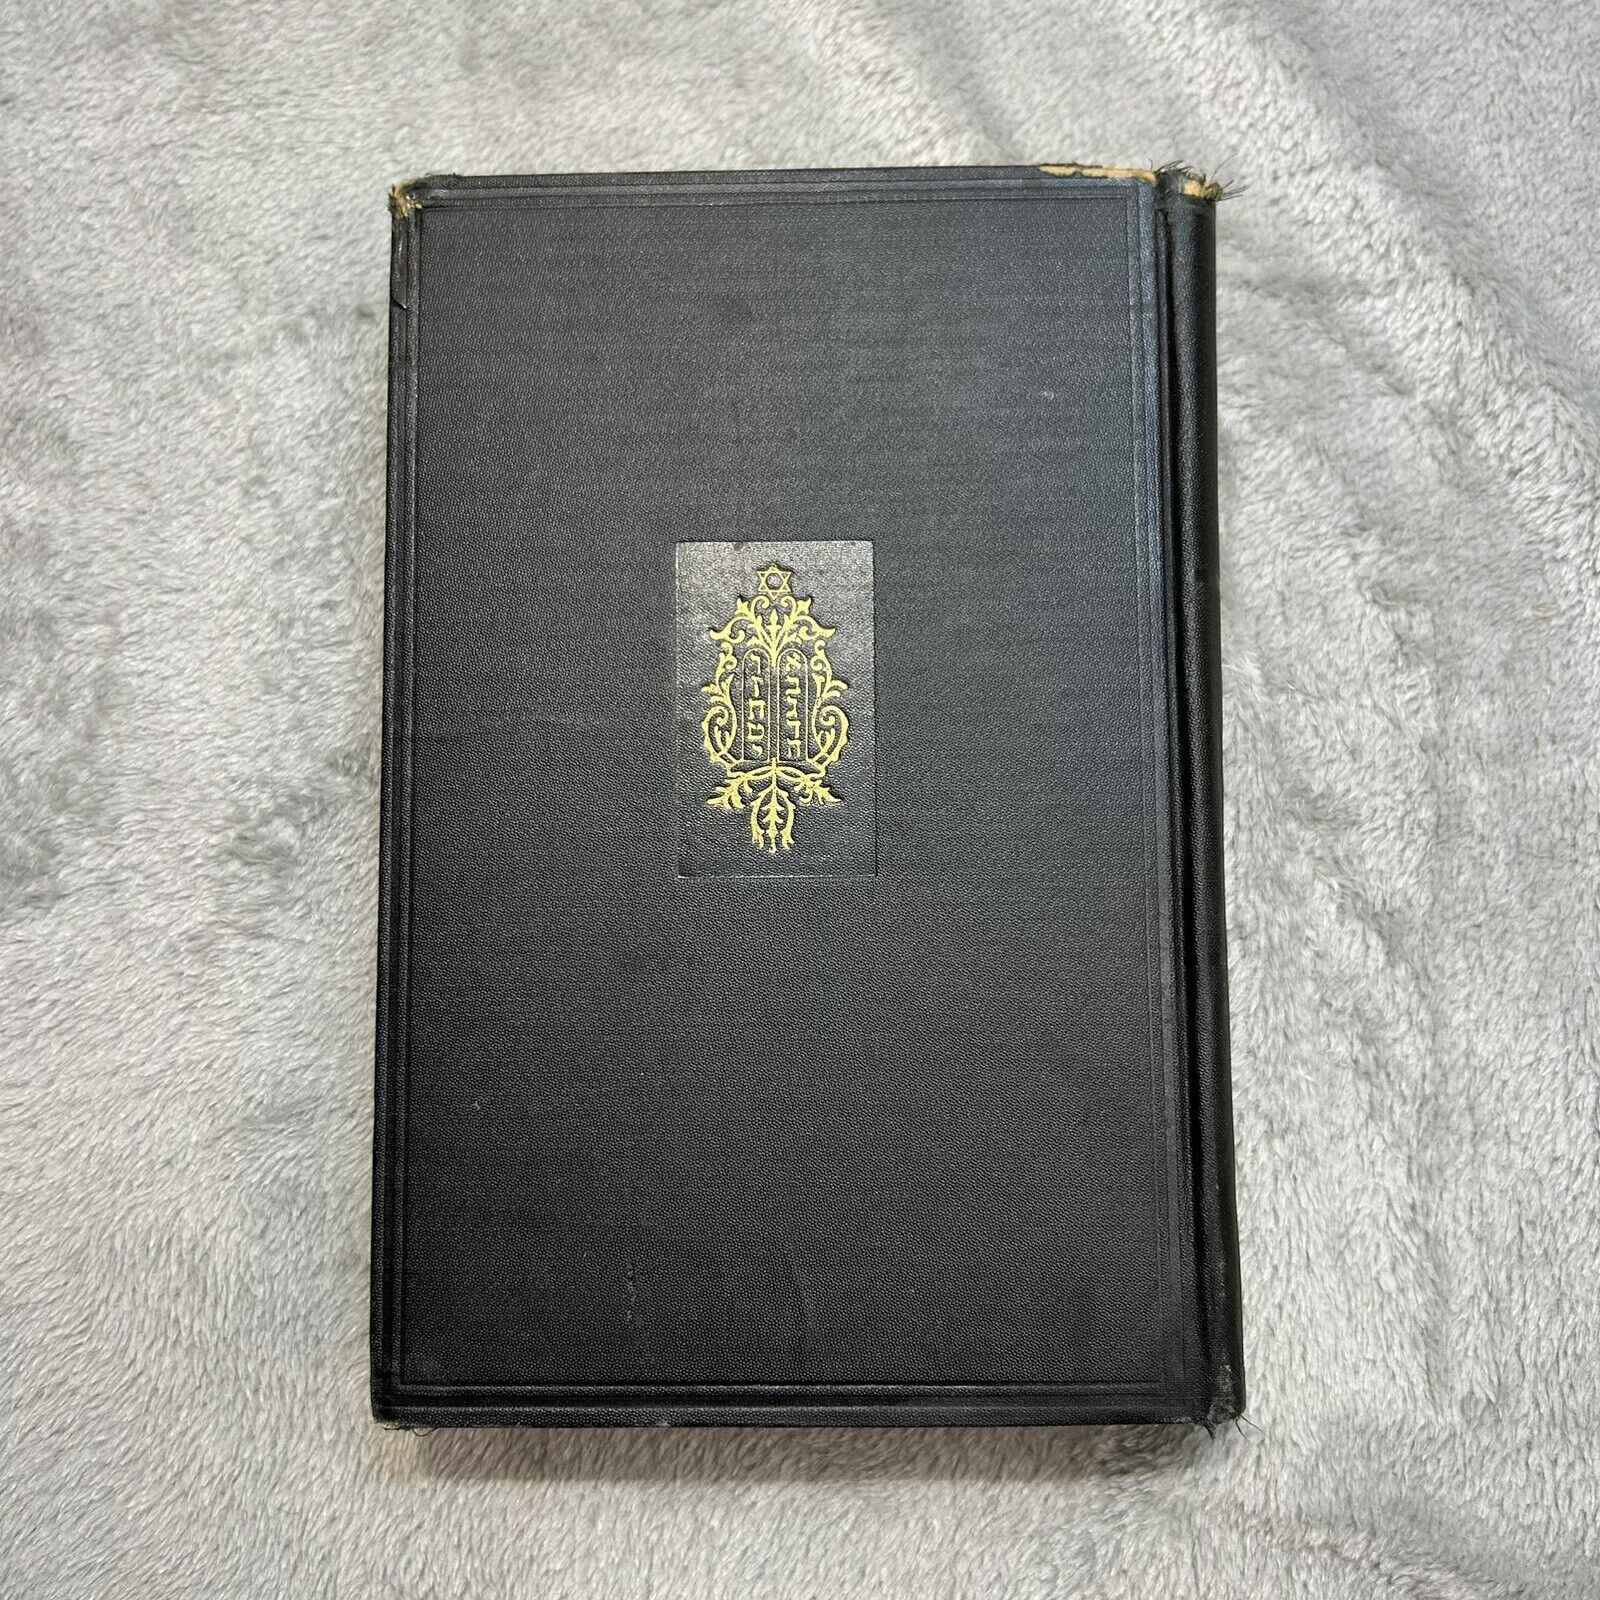 The Star Hebrew book Co. Vol4 Holy Bible 1928 